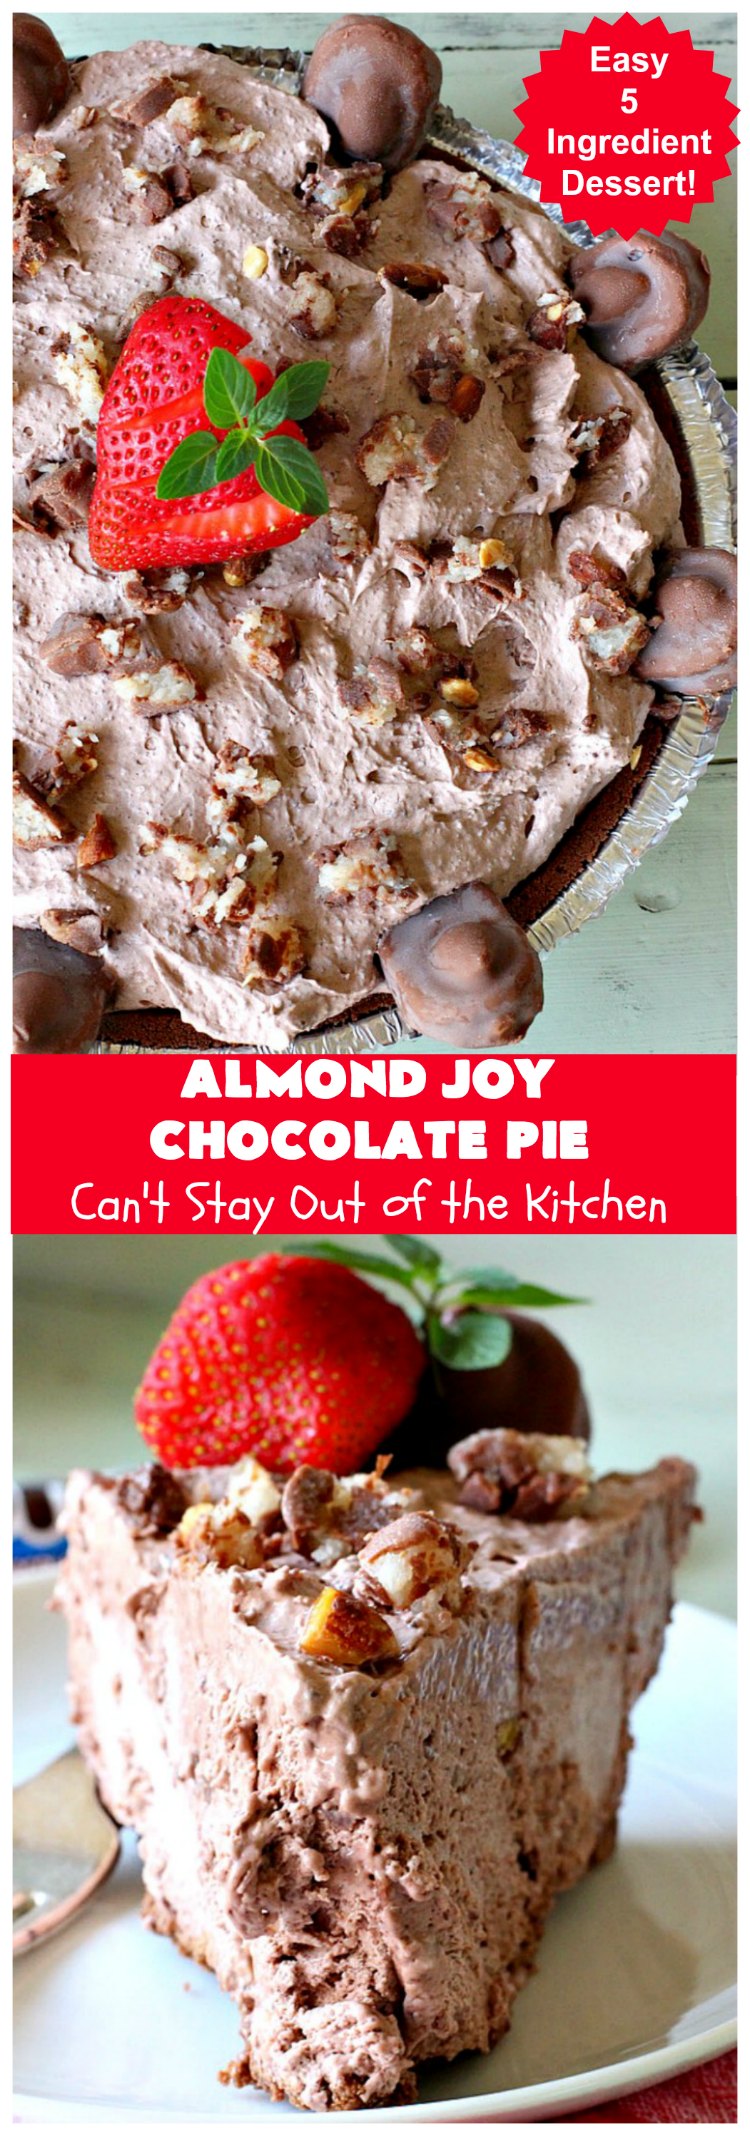 Almond Joy Chocolate Pie | Can't Stay Out of the KitchenAlmond Joy Chocolate Pie | Can't Stay Out of the Kitchen